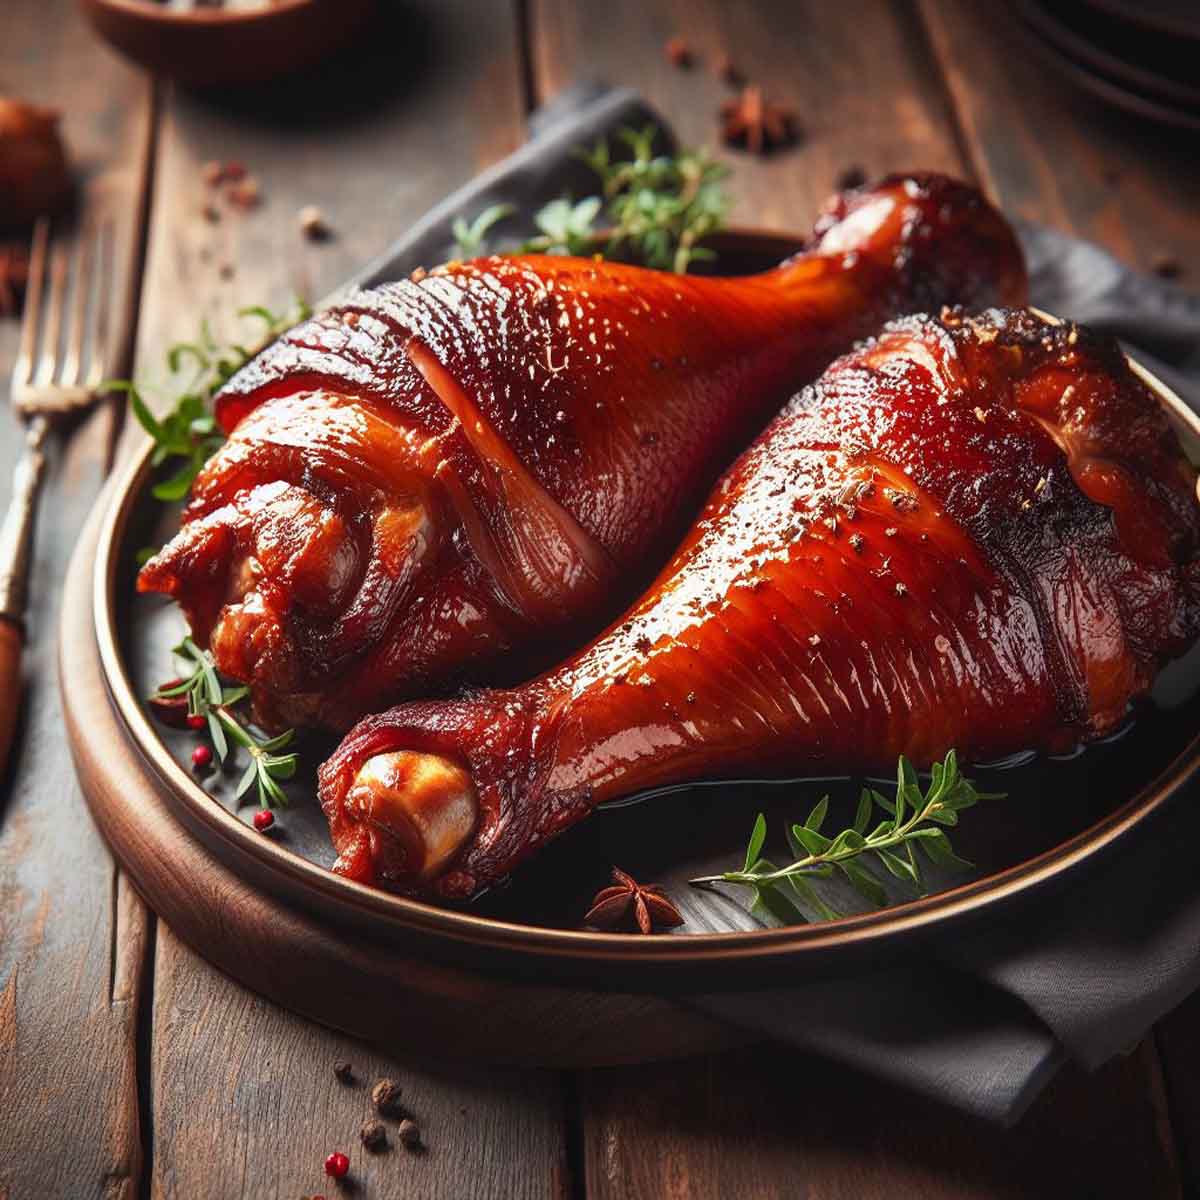 A wide shot of smoked turkey legs on a grill in an outdoor setting, perfectly cooked with a golden-brown exterior.